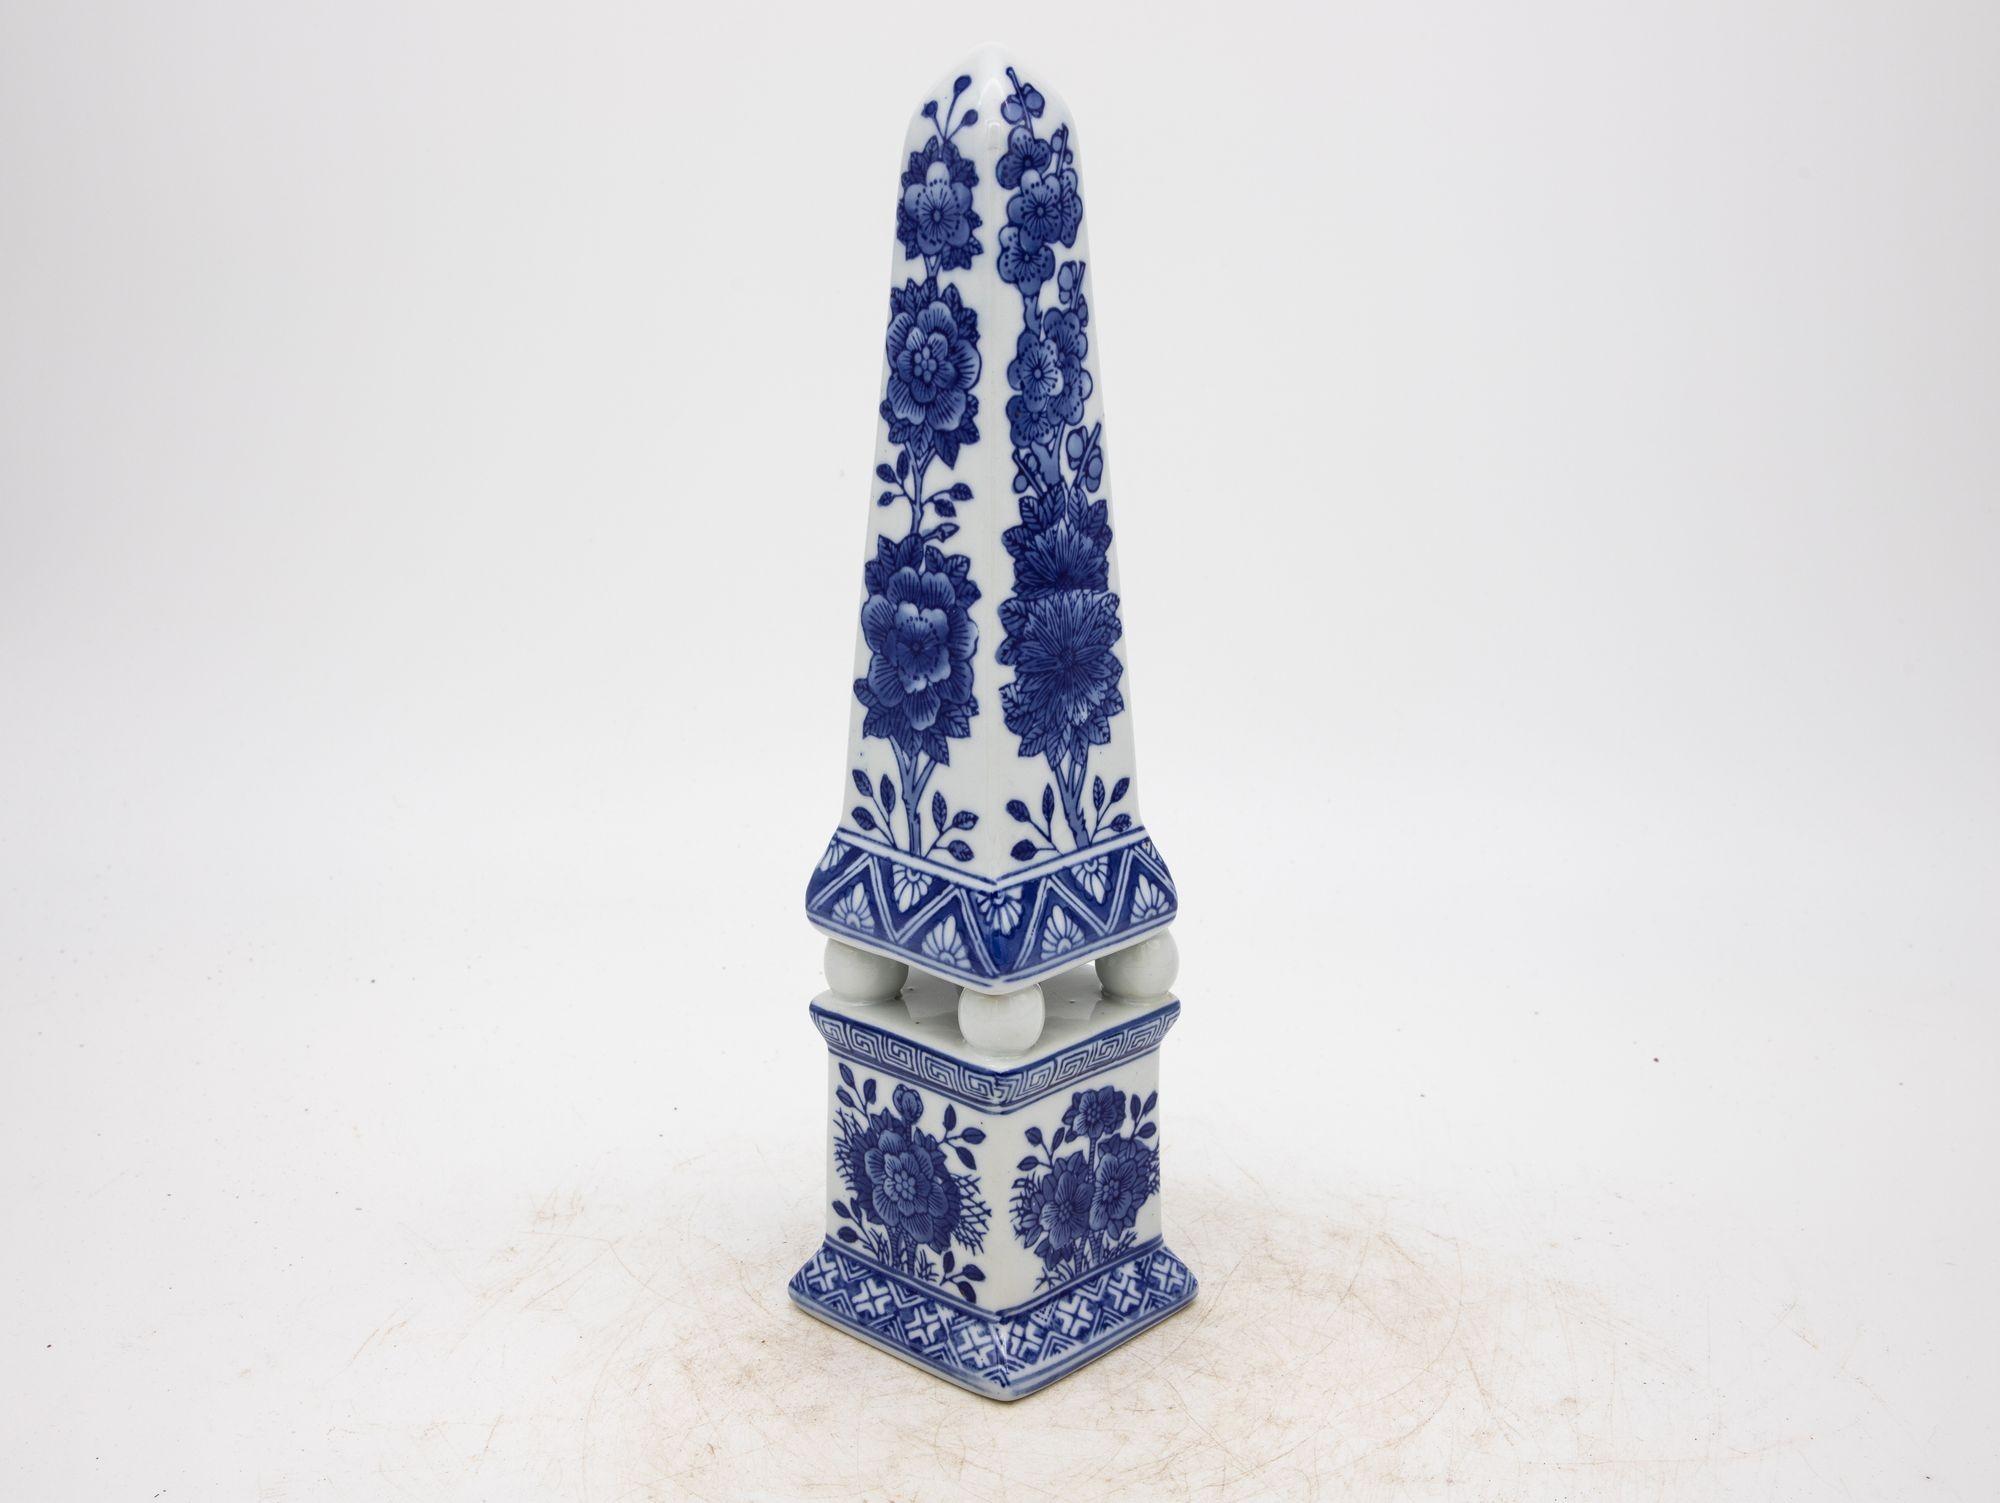 Elegance takes a distinctive form in this blue and white chinoiserie ceramic obelisk. The intricate detailing captures the essence of traditional East Asian artistry. Delicate strokes of cobalt blue dance upon a pristine white background, portraying